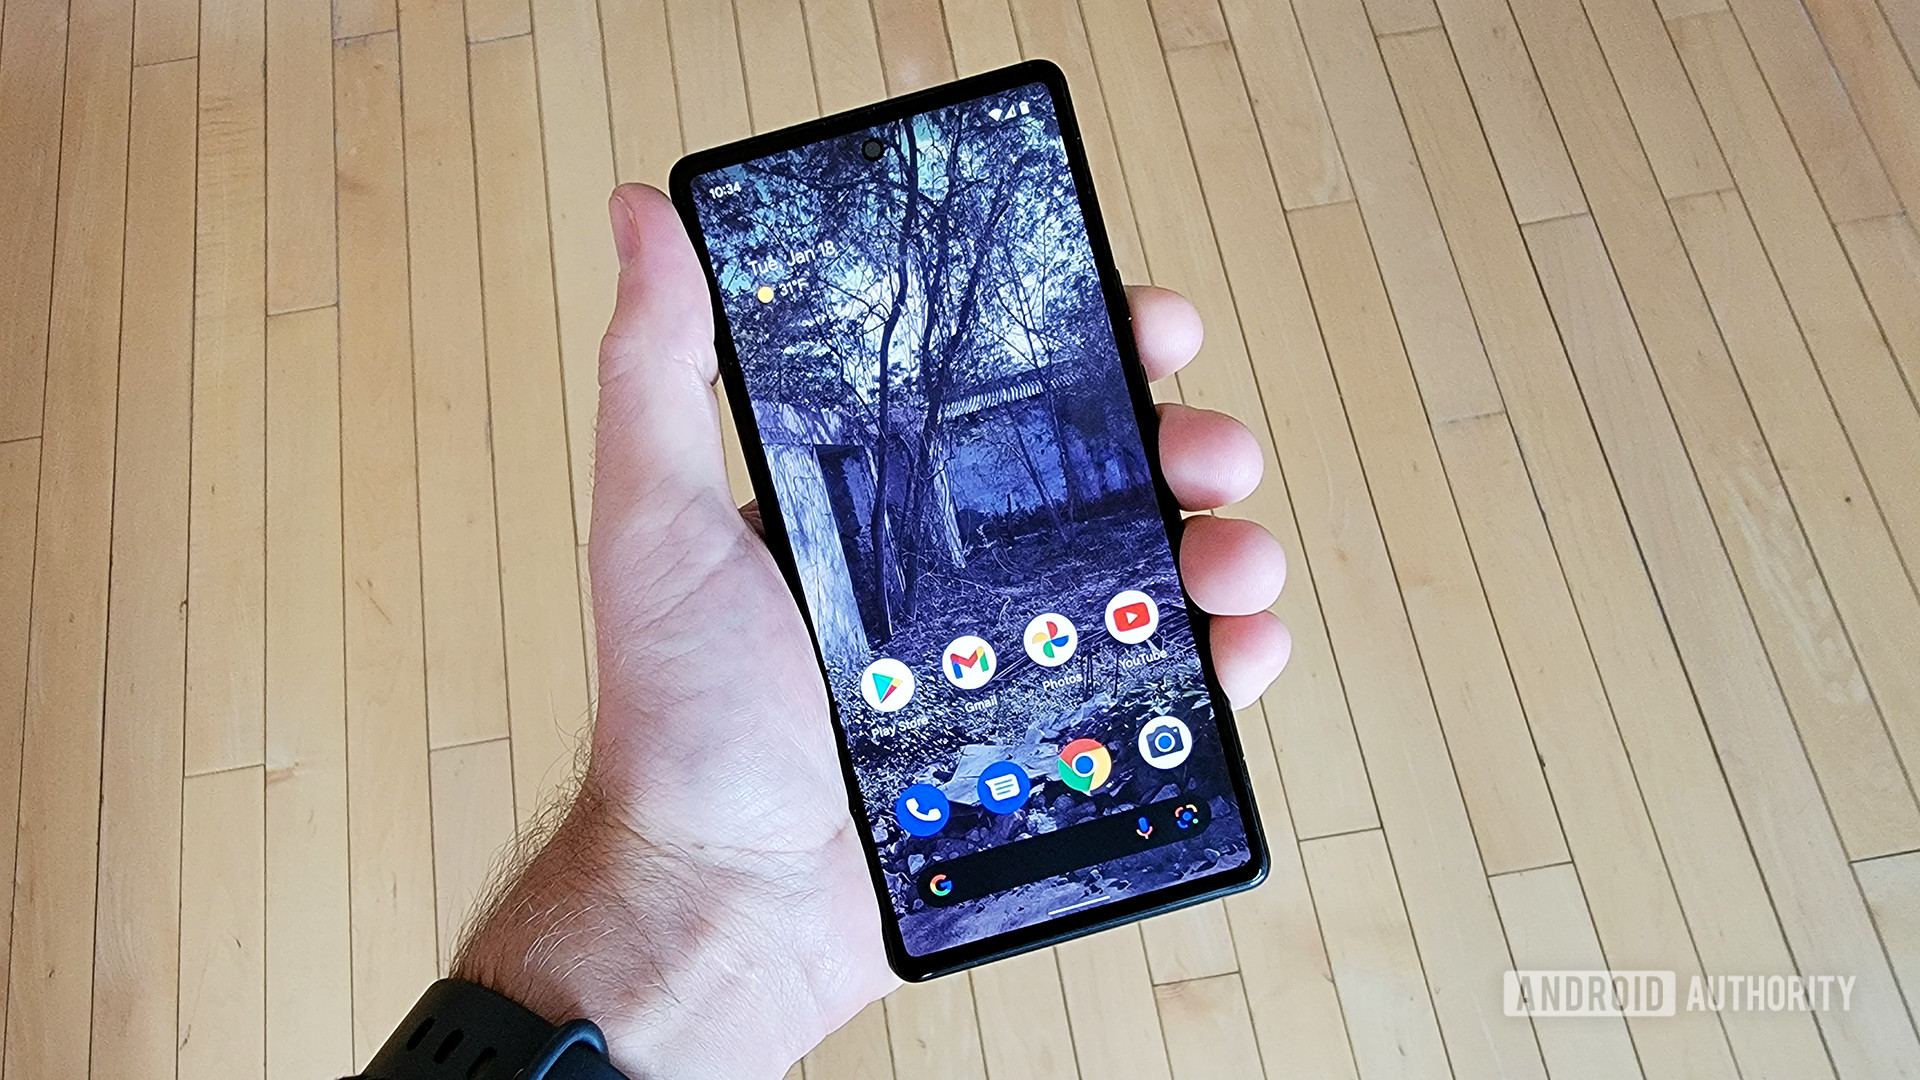 Wallpaper Wednesday: Android Wallpapers 2022-01-19